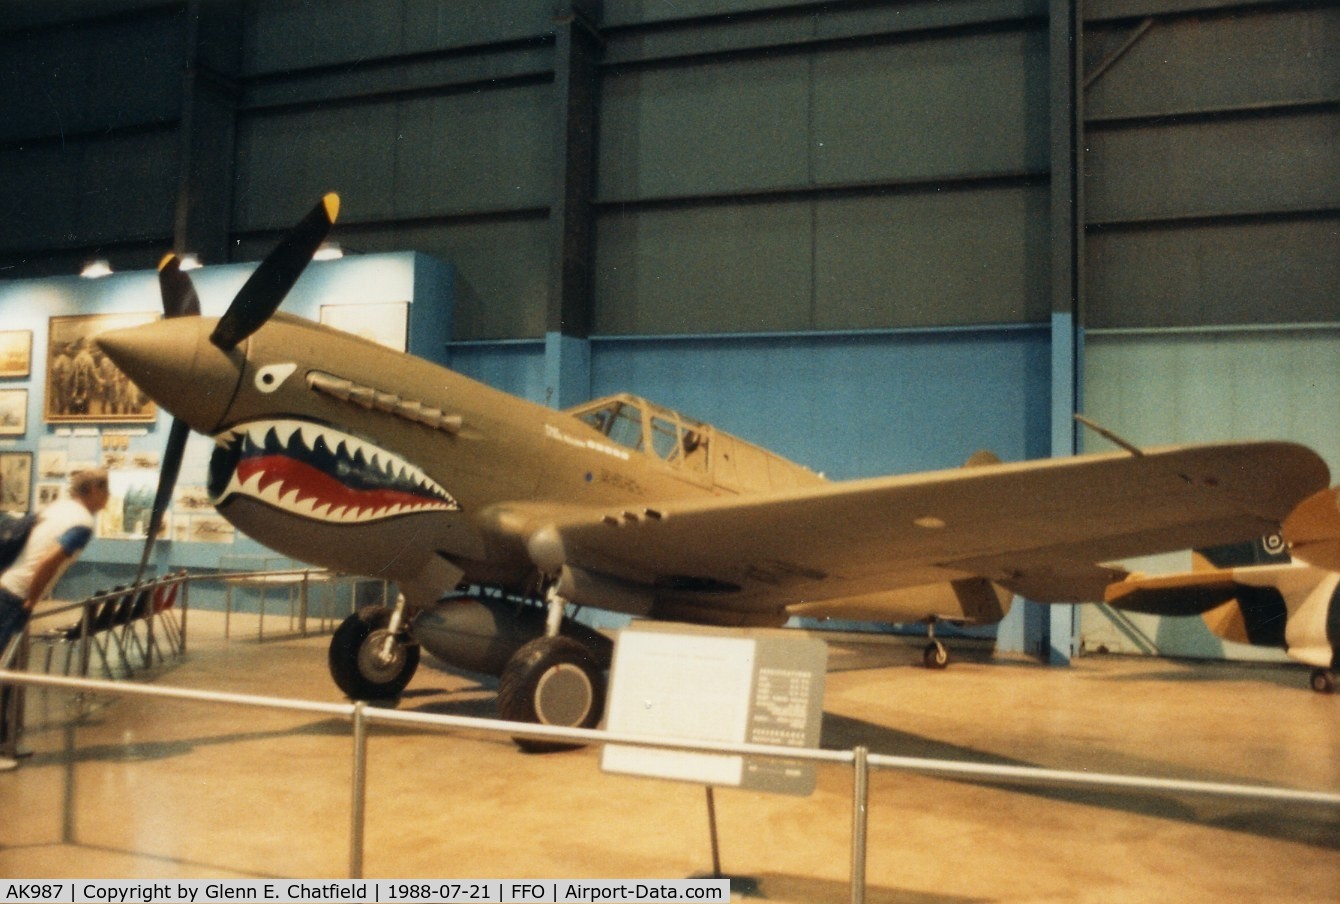 AK987, 1942 Curtiss P-40E Kittyhawk 1A C/N 18731, P-40E at the National Museum of the U.S. Air Force